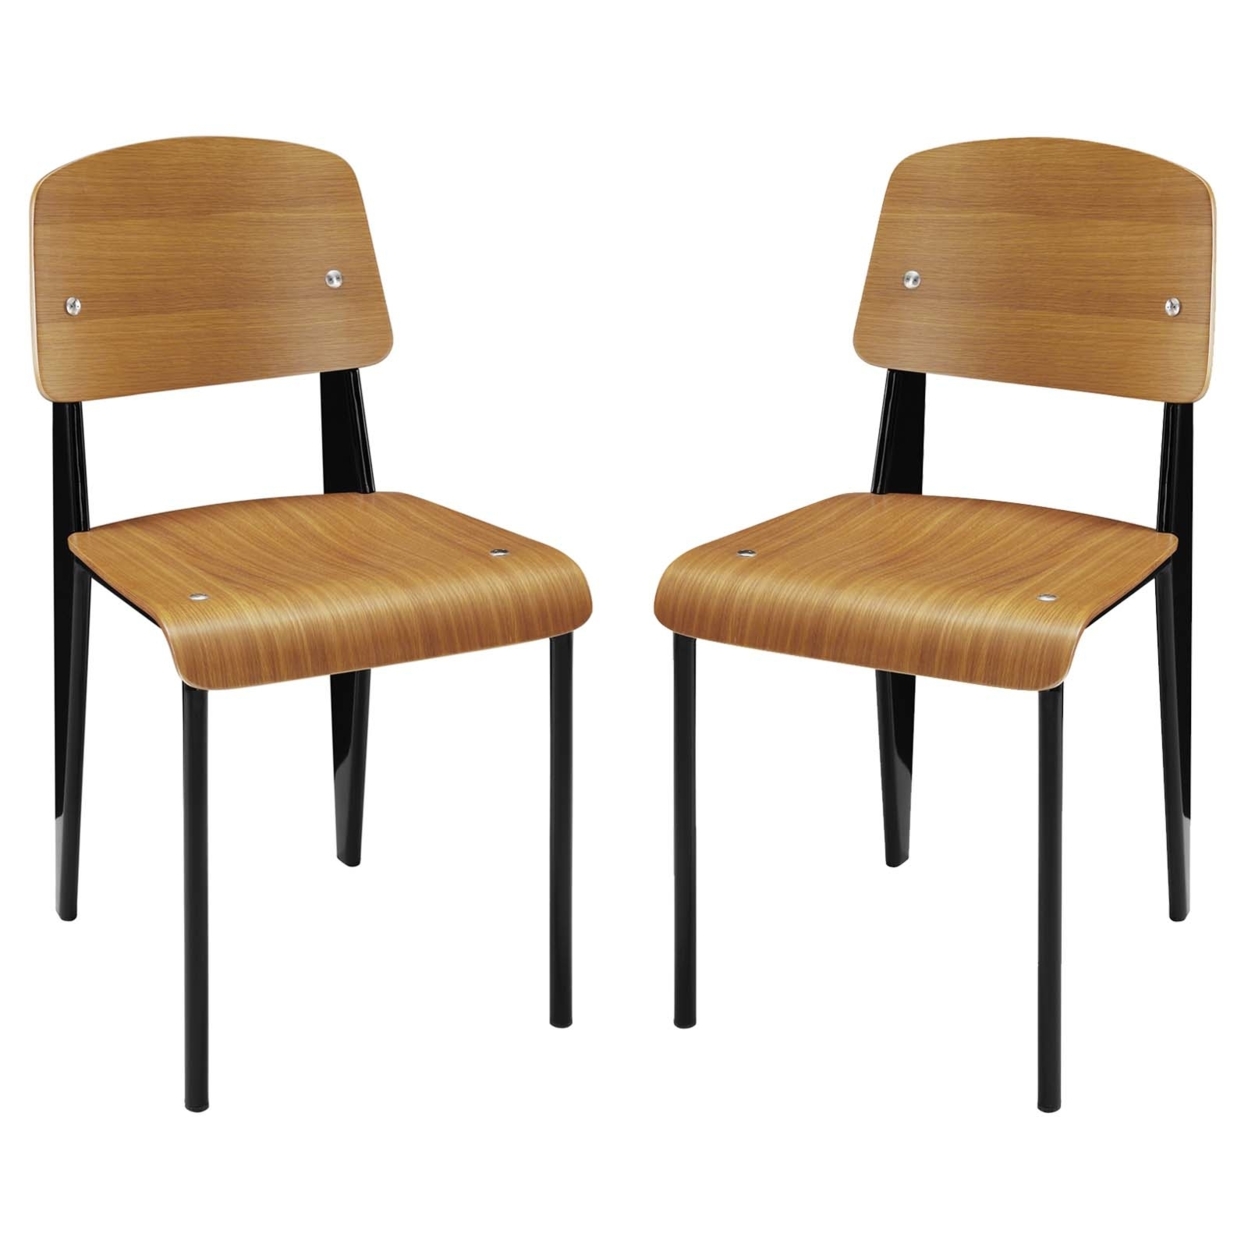 Cabin Dining Side Chair Set Of 2, Walnut